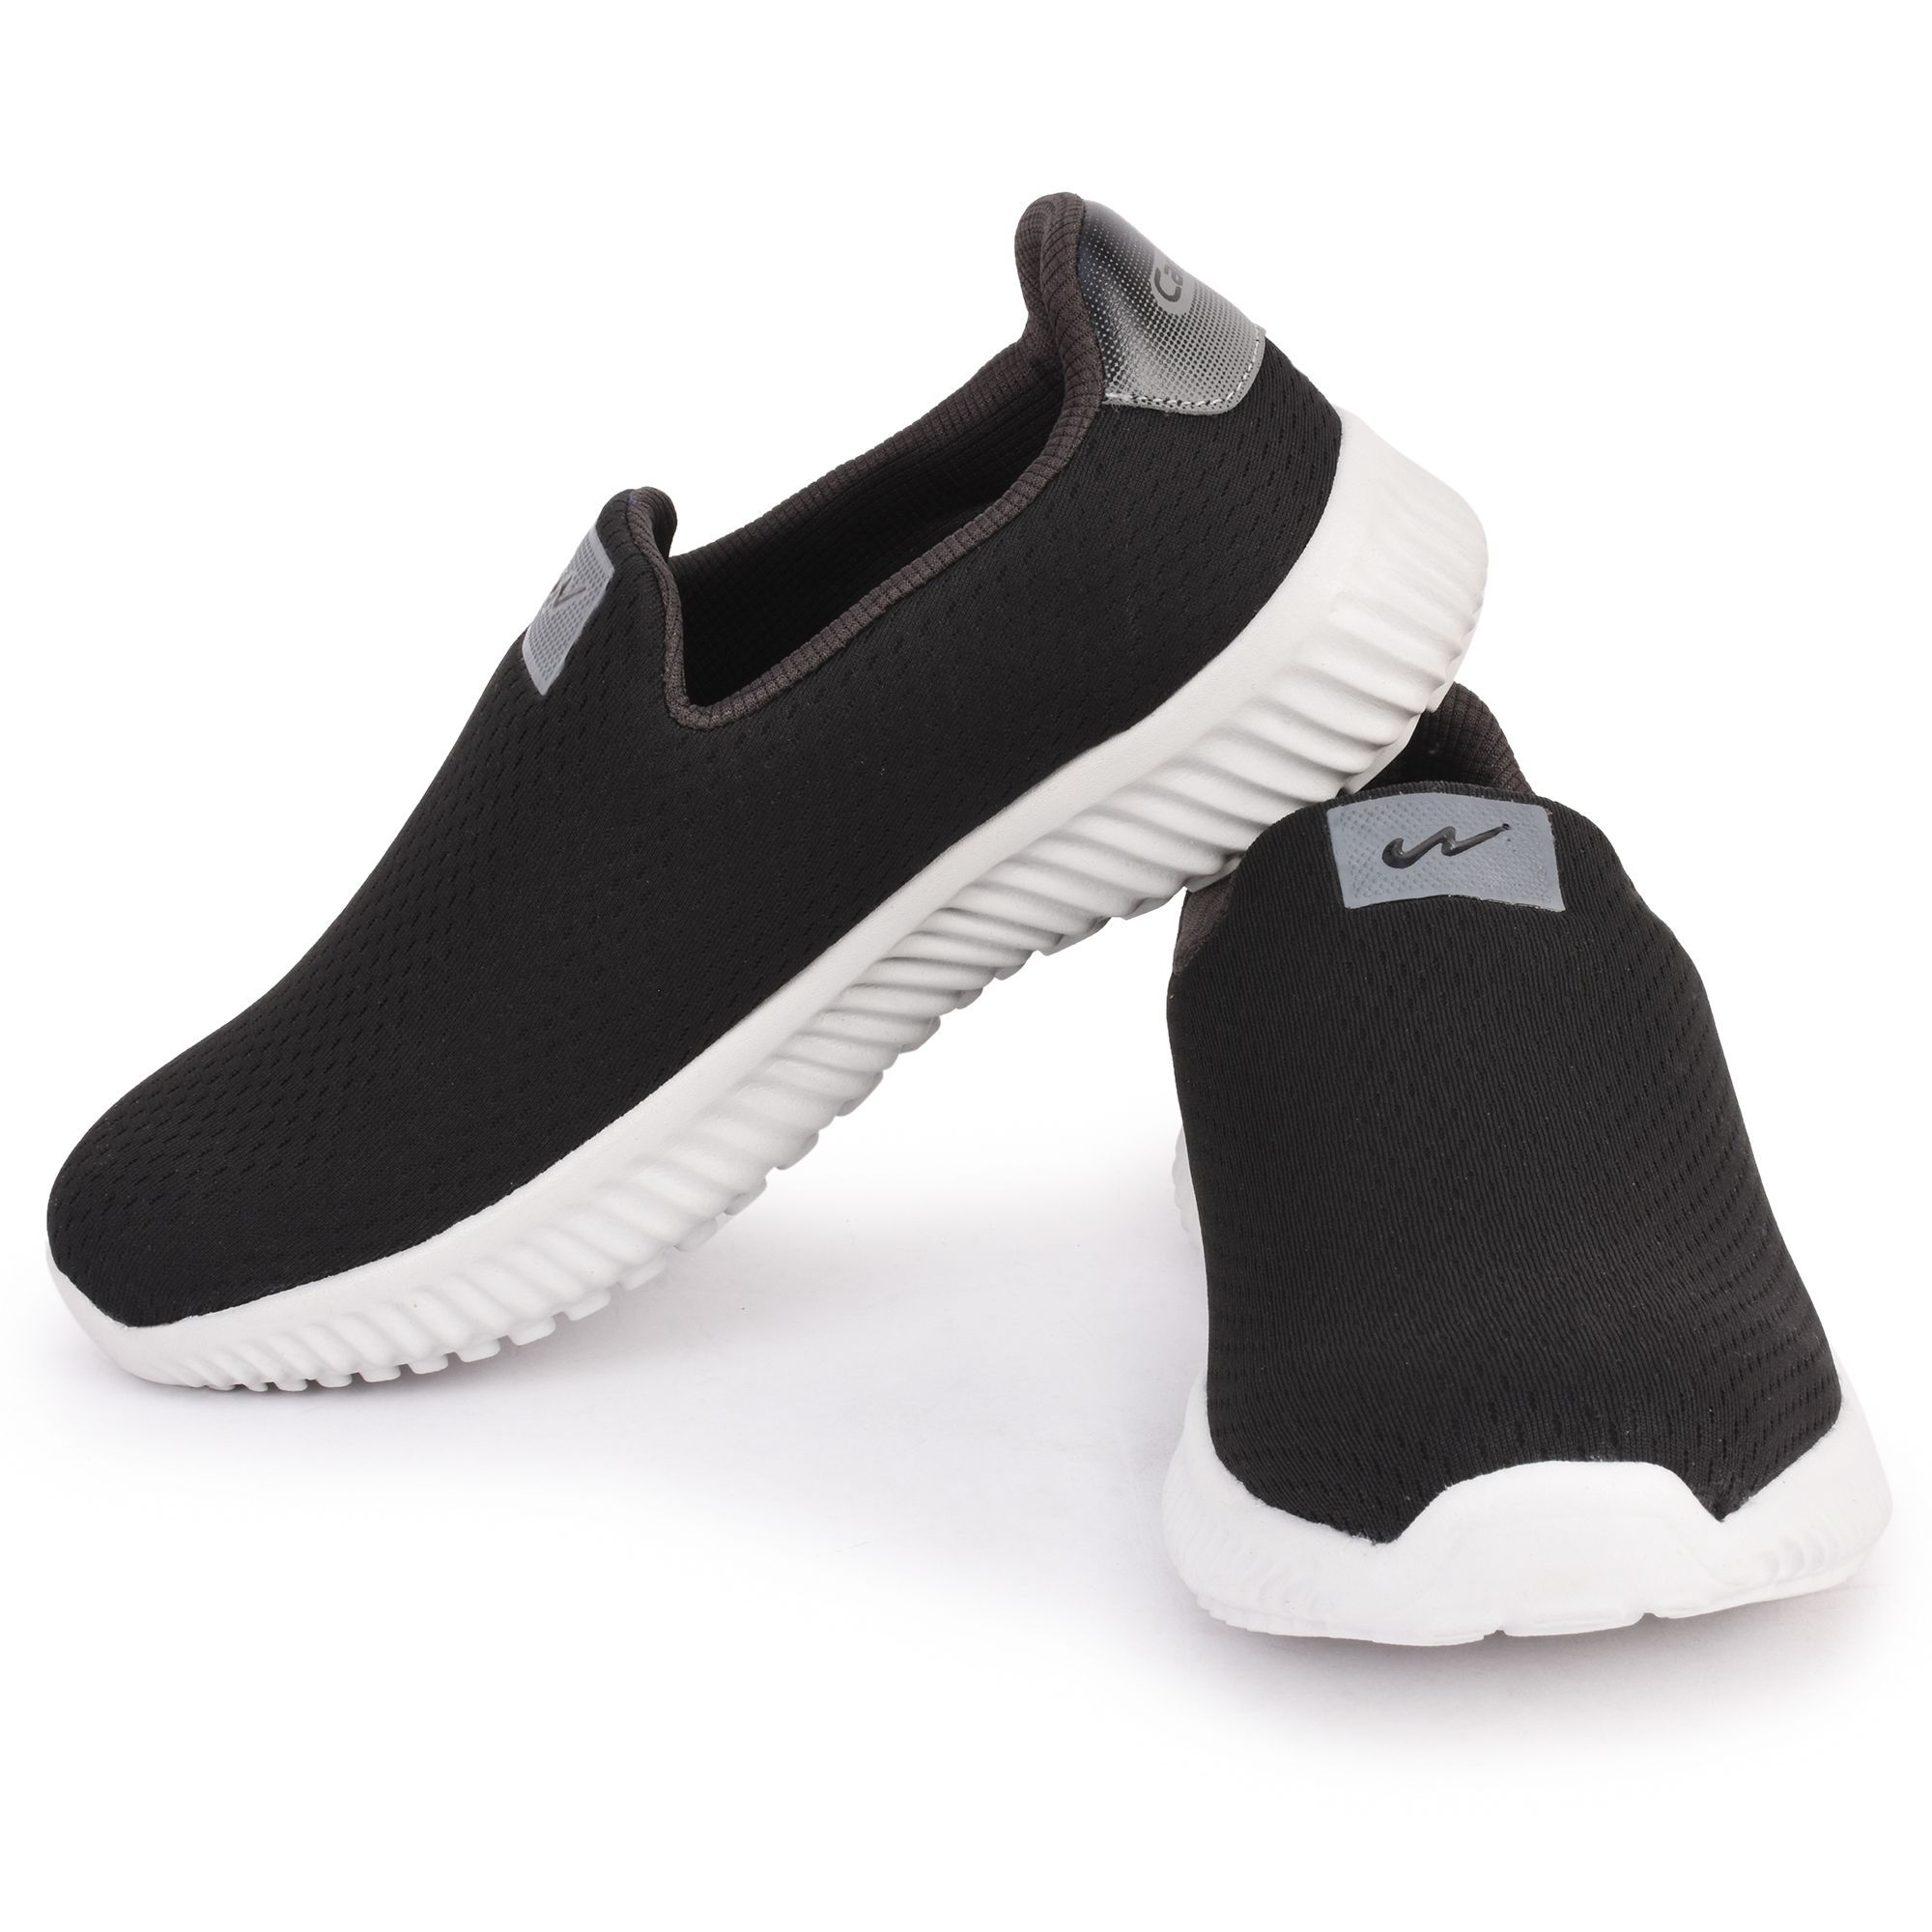 Campus OXYFIT Black Running Shoes - Buy Campus OXYFIT Black Running ...